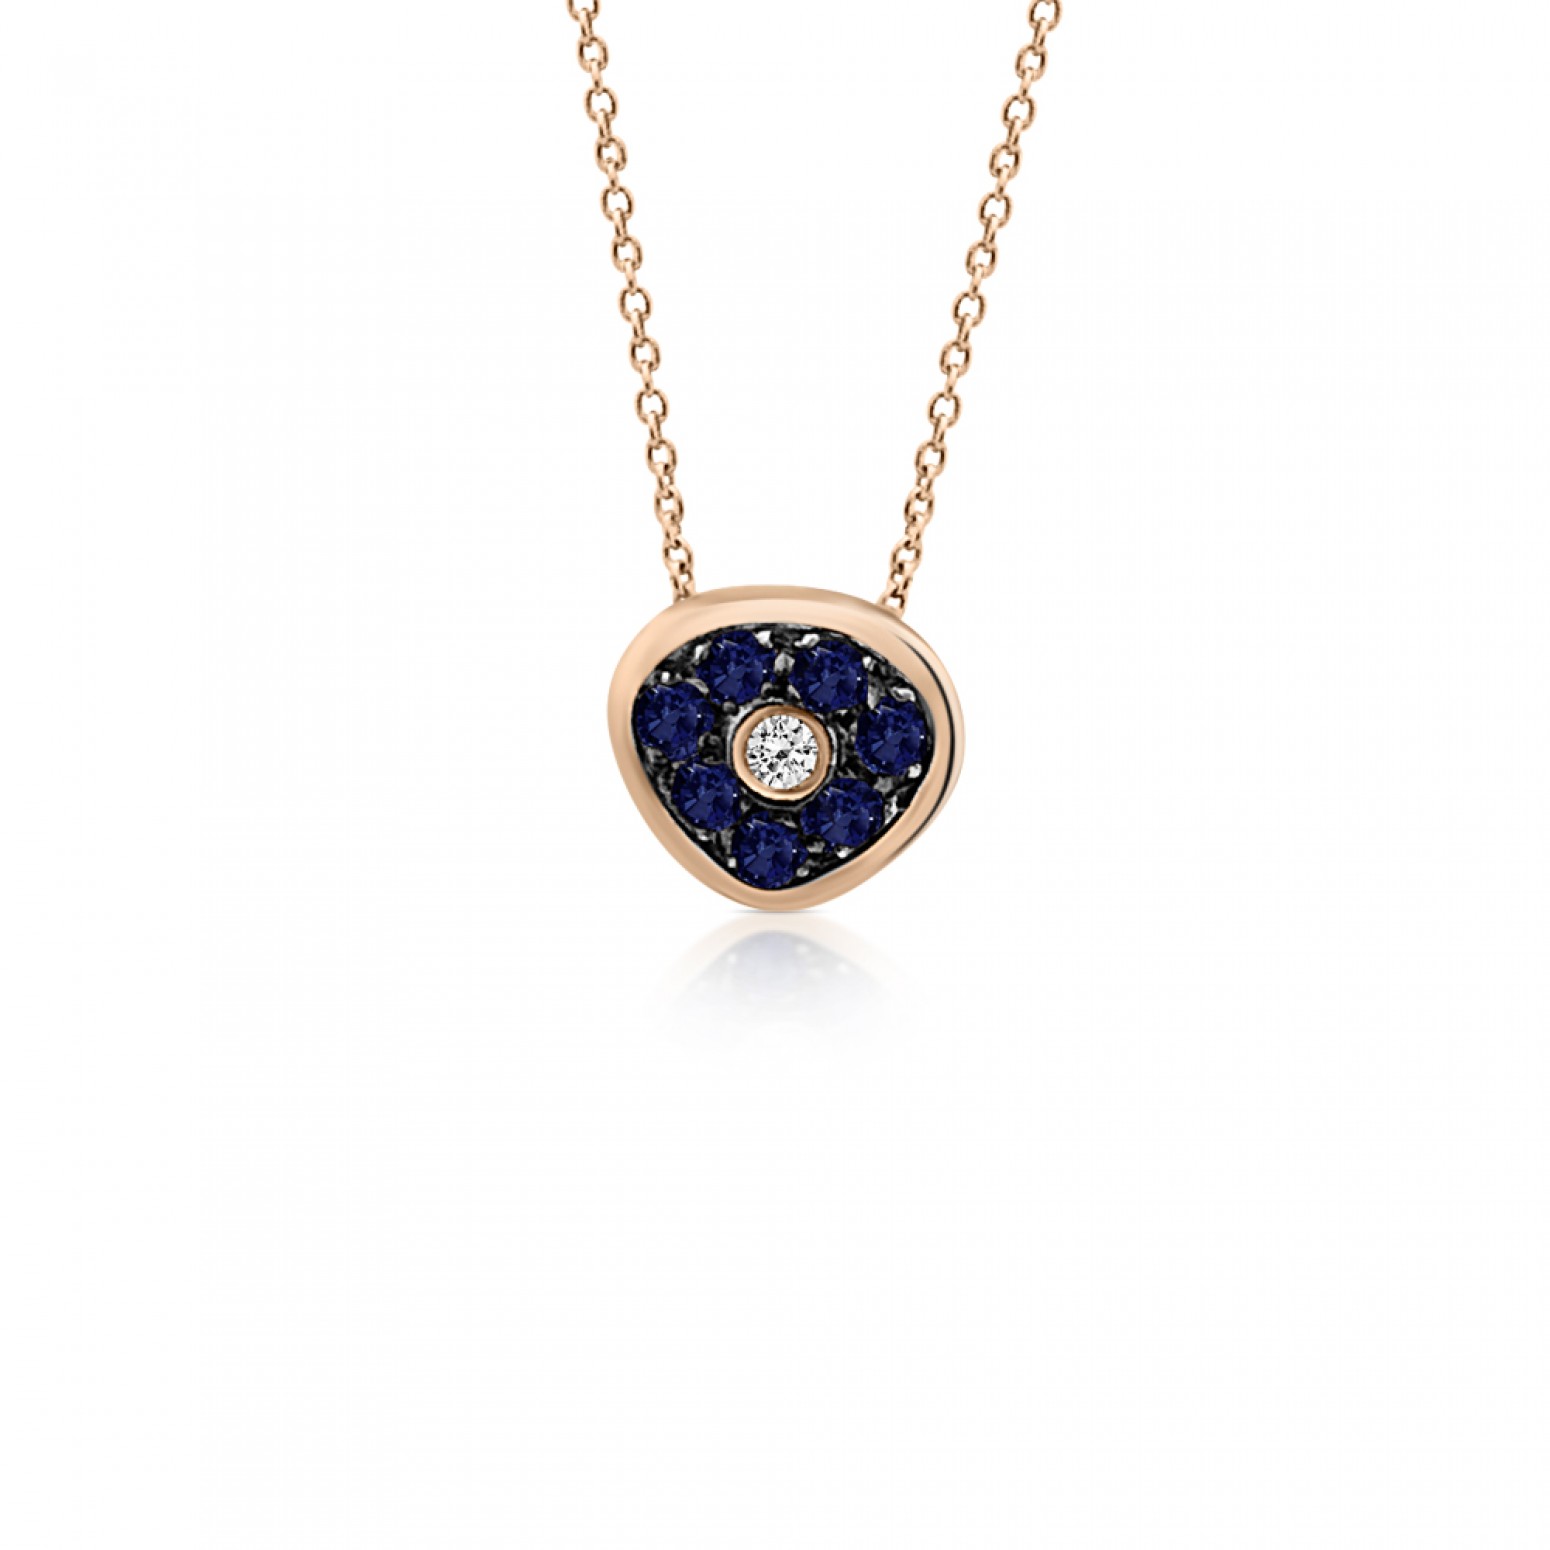 Eye necklace, Κ18 pink gold with sapphires 0.18ct and diamond 0.02ct, VS1, H ko3419 NECKLACES Κοσμηματα - chrilia.gr